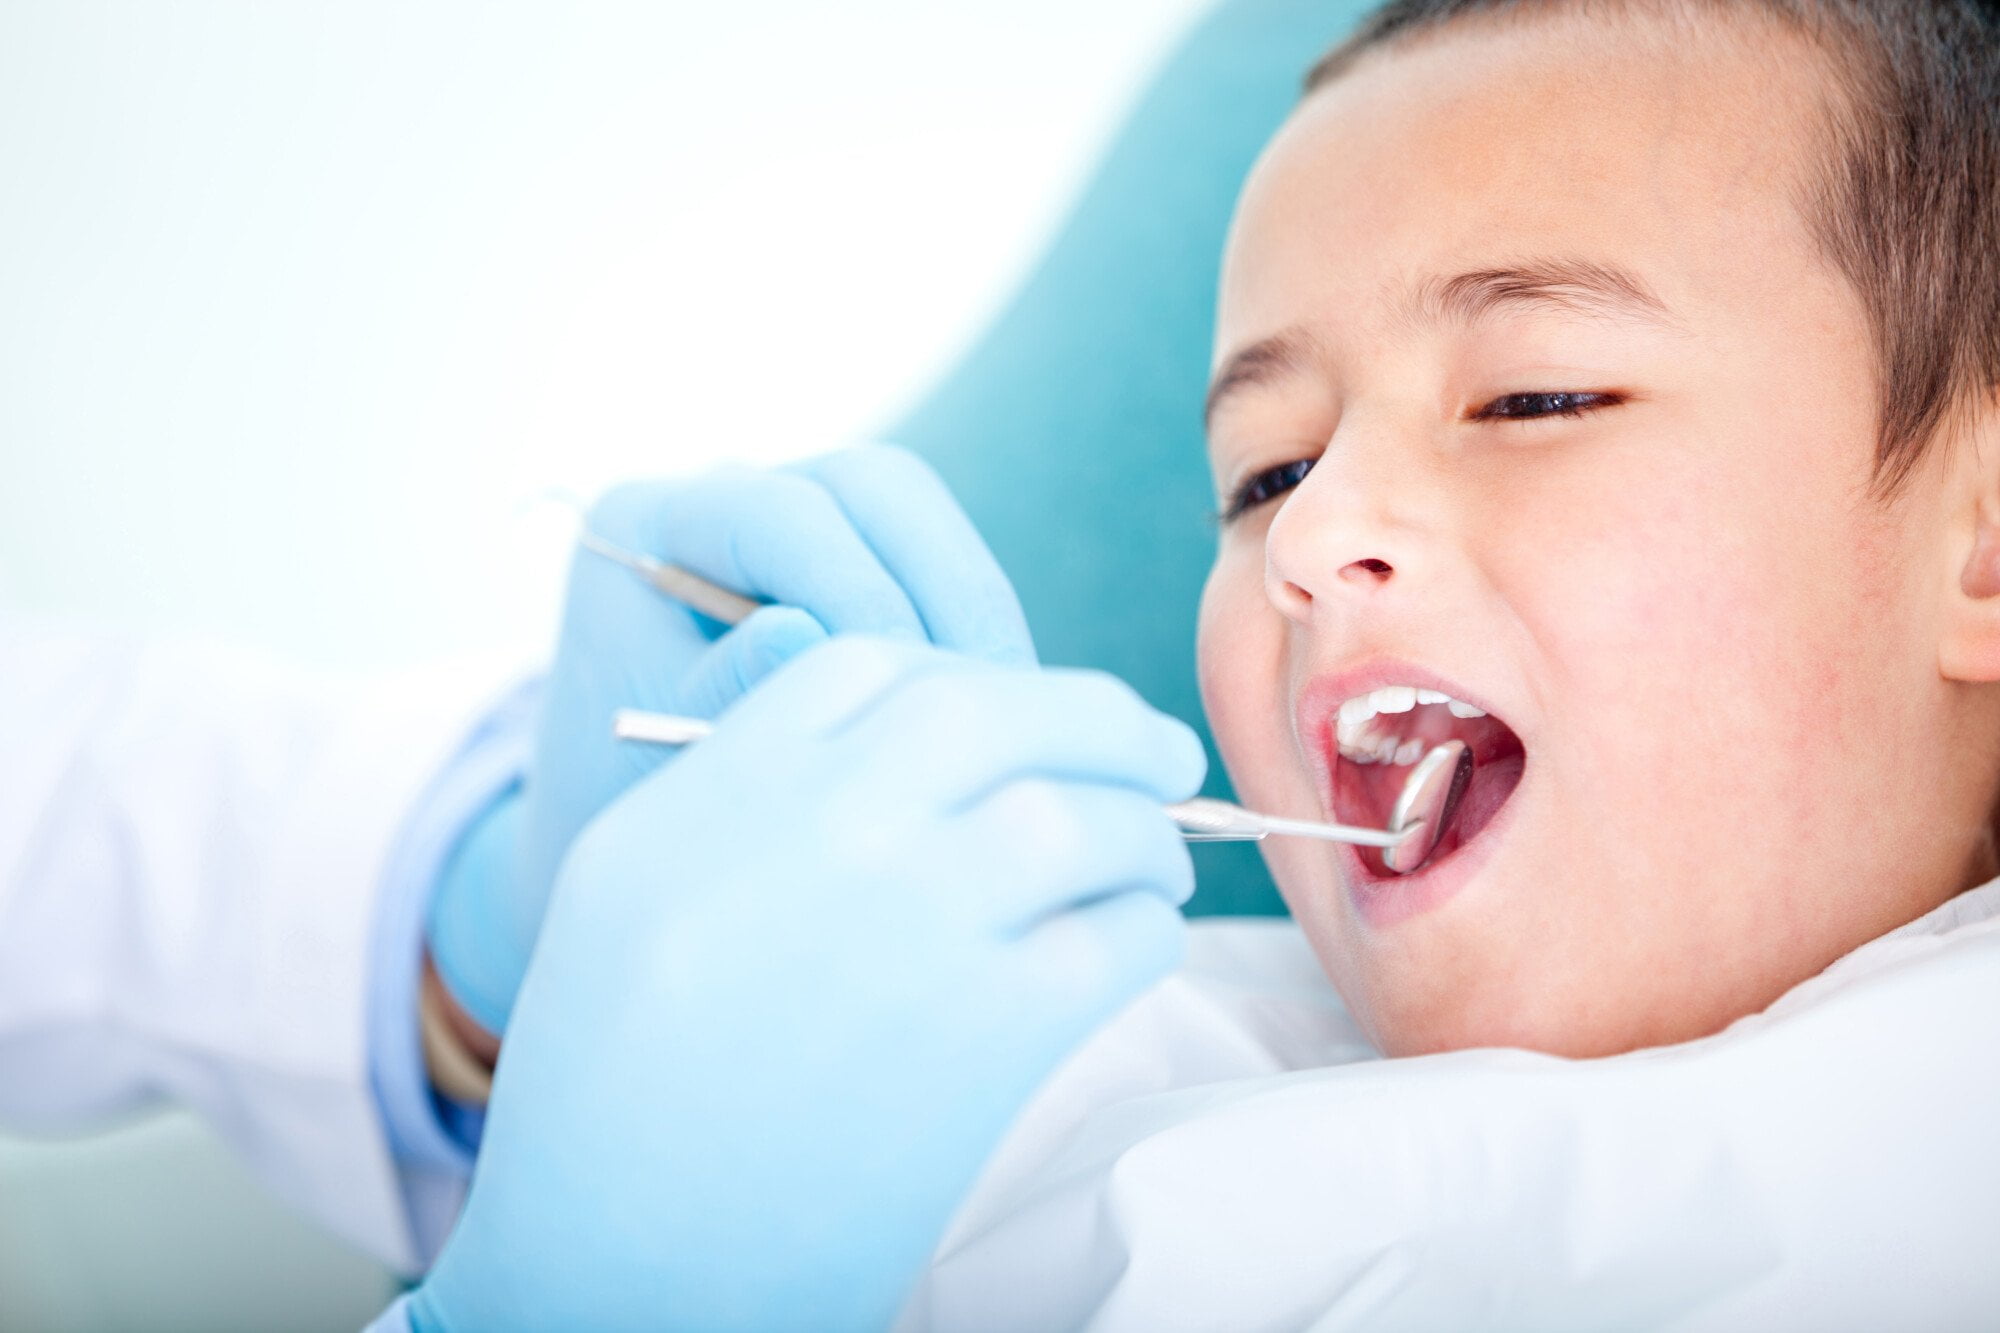 Find a top children dentist near me TODAY with these 4 essential tips. Ensure your child's dental care is in trusted hands.